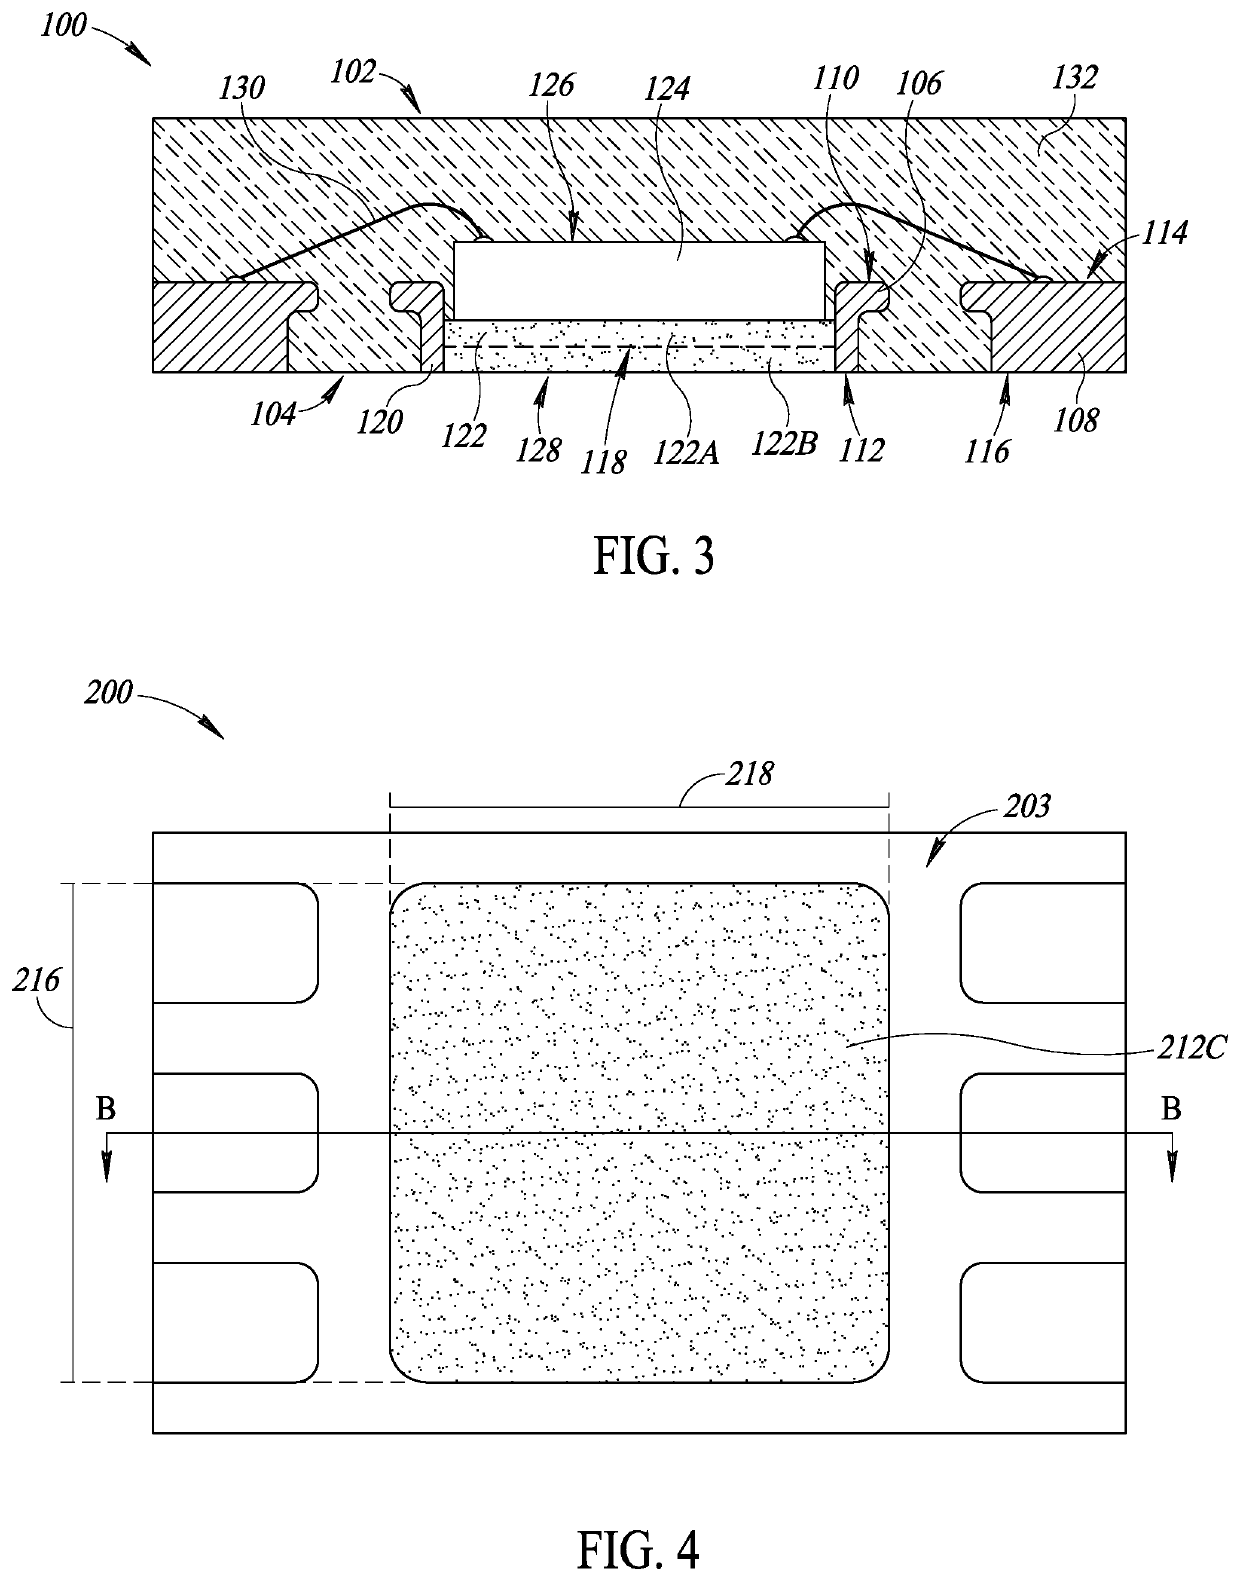 Semiconductor package with a cavity in a die pad for reducing voids in the solder